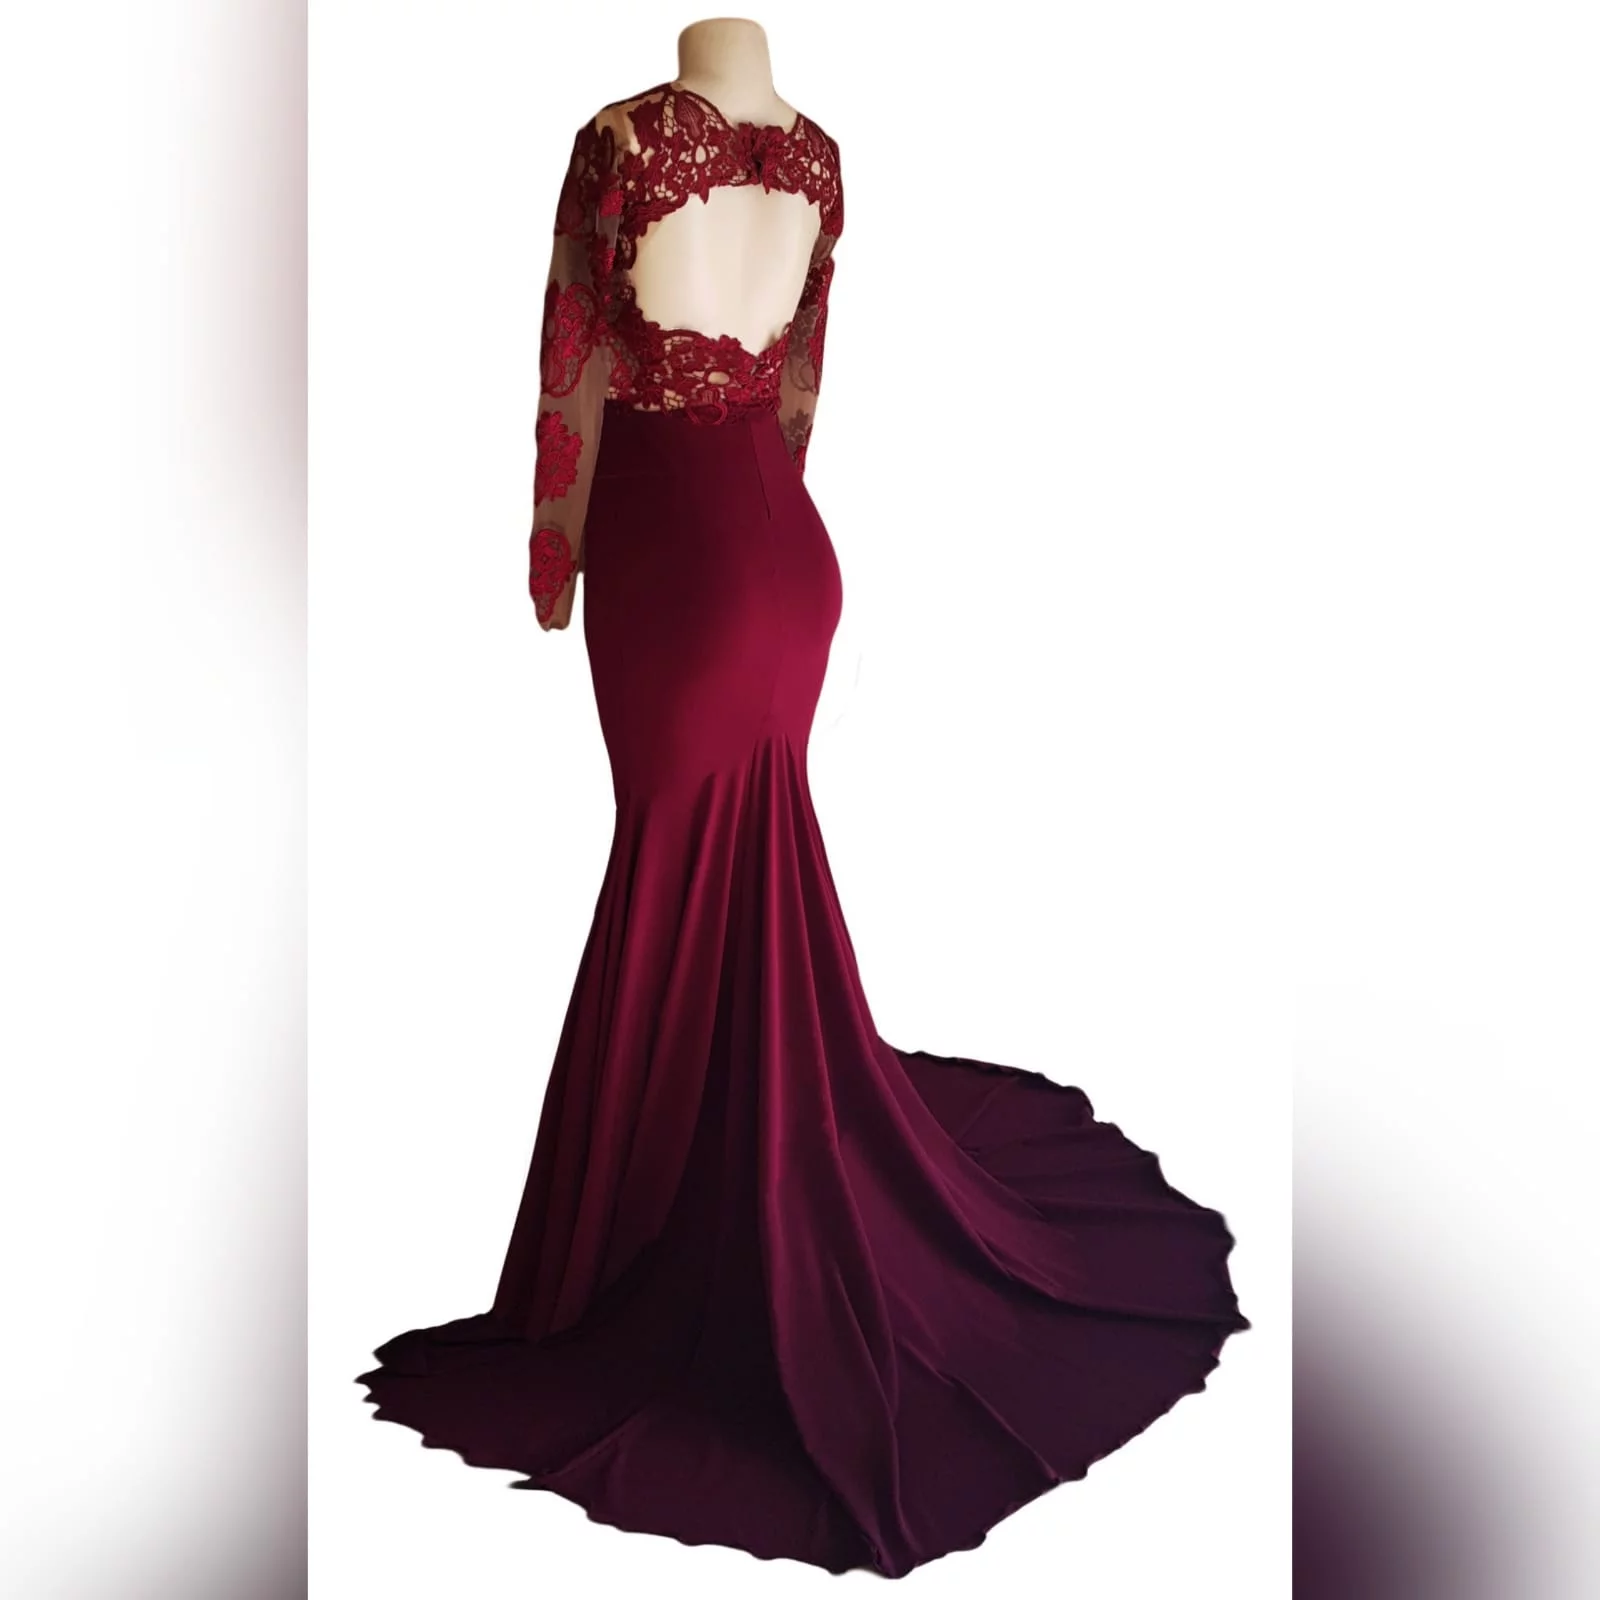 Burgundy soft mermaid illusion lace bodice prom dress 6 burgundy soft mermaid illusion lace bodice prom dress with a rounded open back with lace long sleeves and a train.